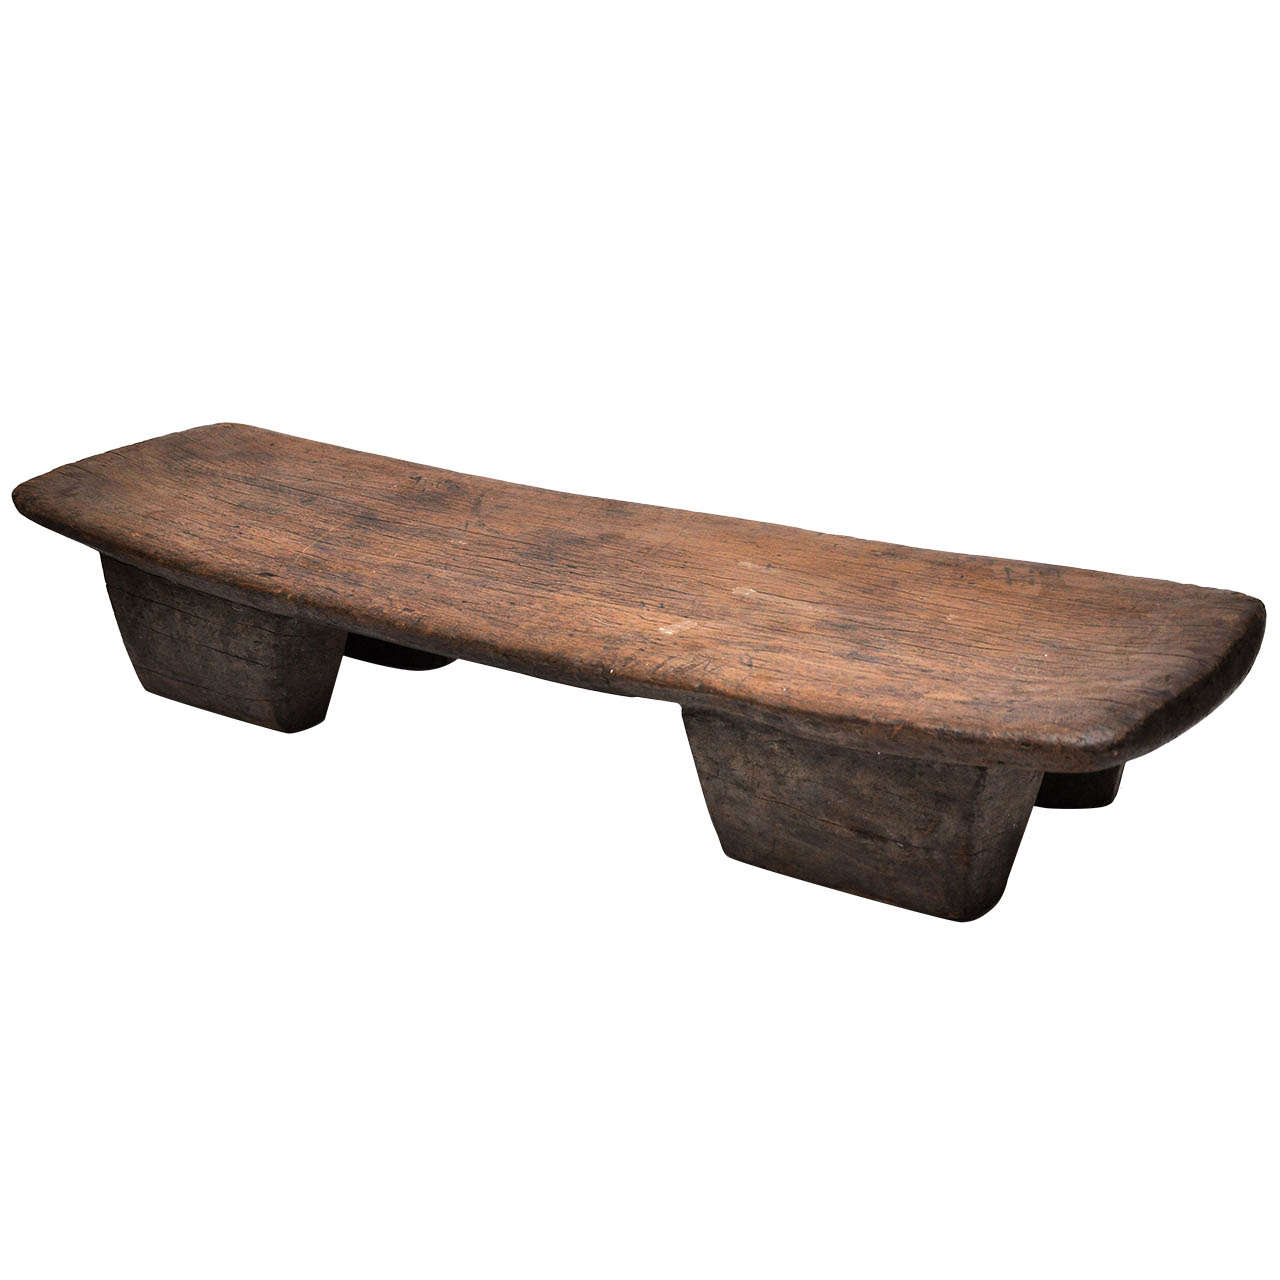 Small Carved African Bench / Stool at 1stdibs